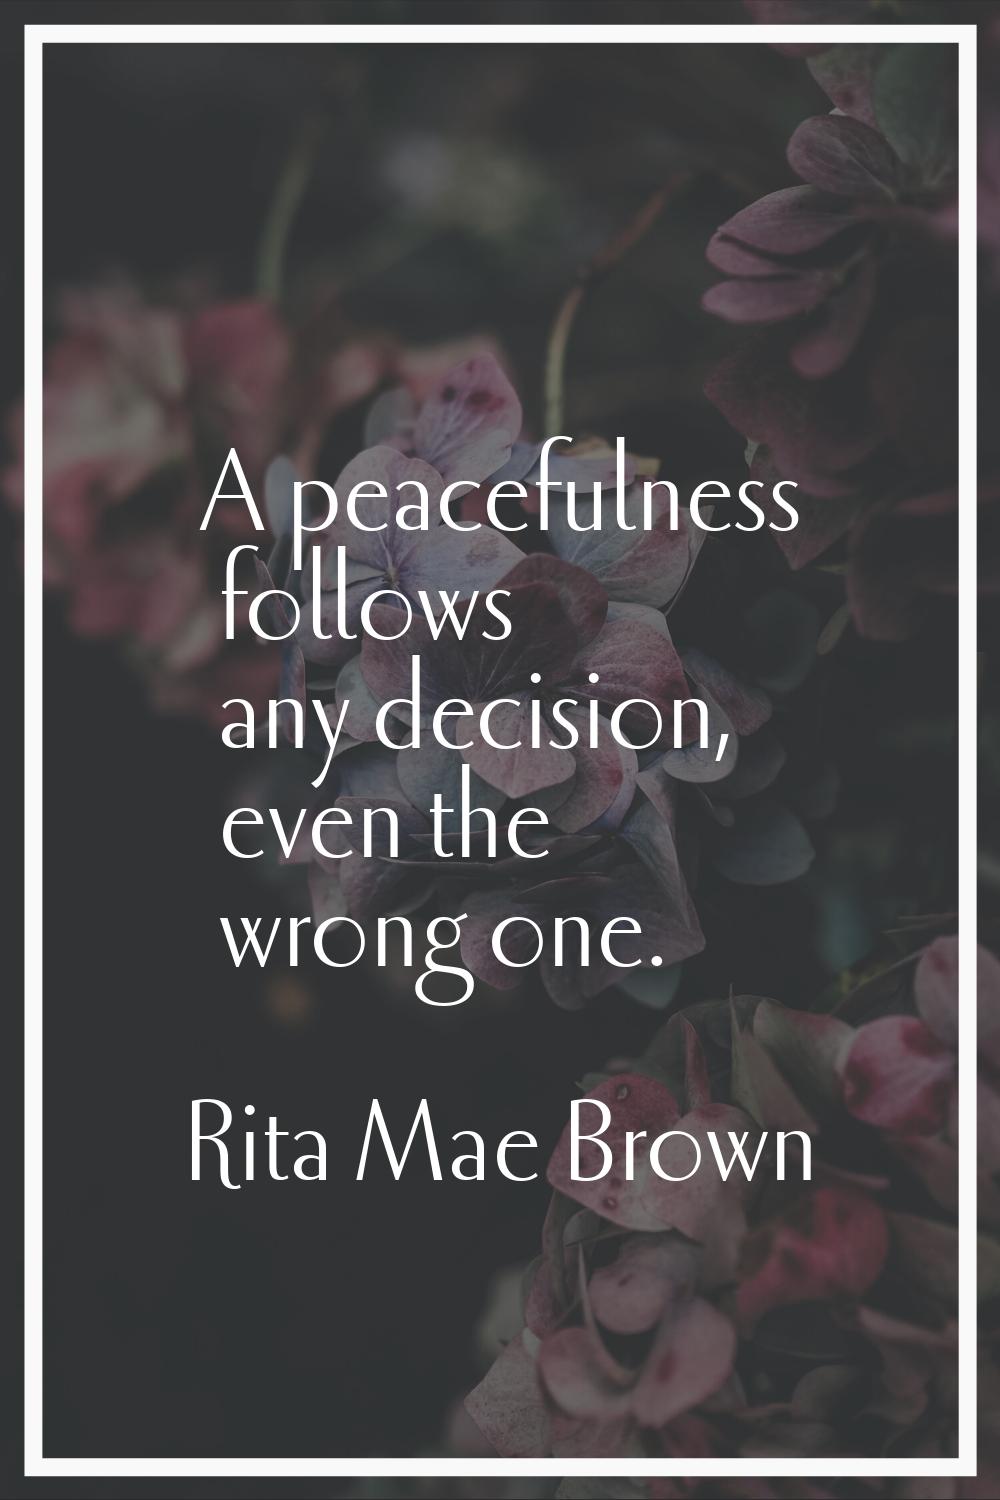 A peacefulness follows any decision, even the wrong one.